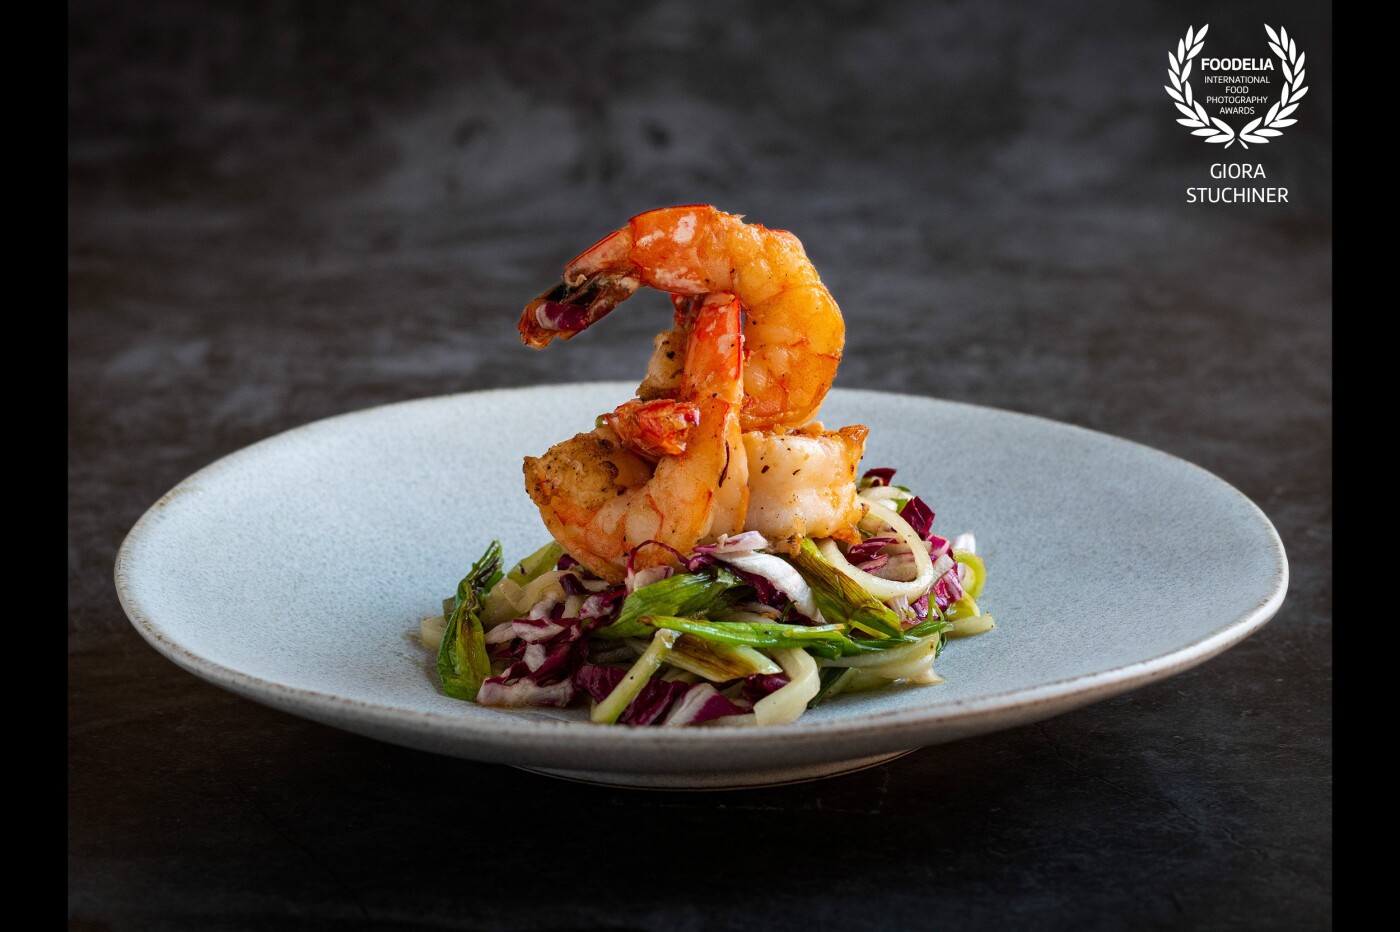 Shrimp and cucumber salad with grilled scallion, radicchio, and tarragon dressing by chef Anne Margret O'Hare of O Cuisine in NYC